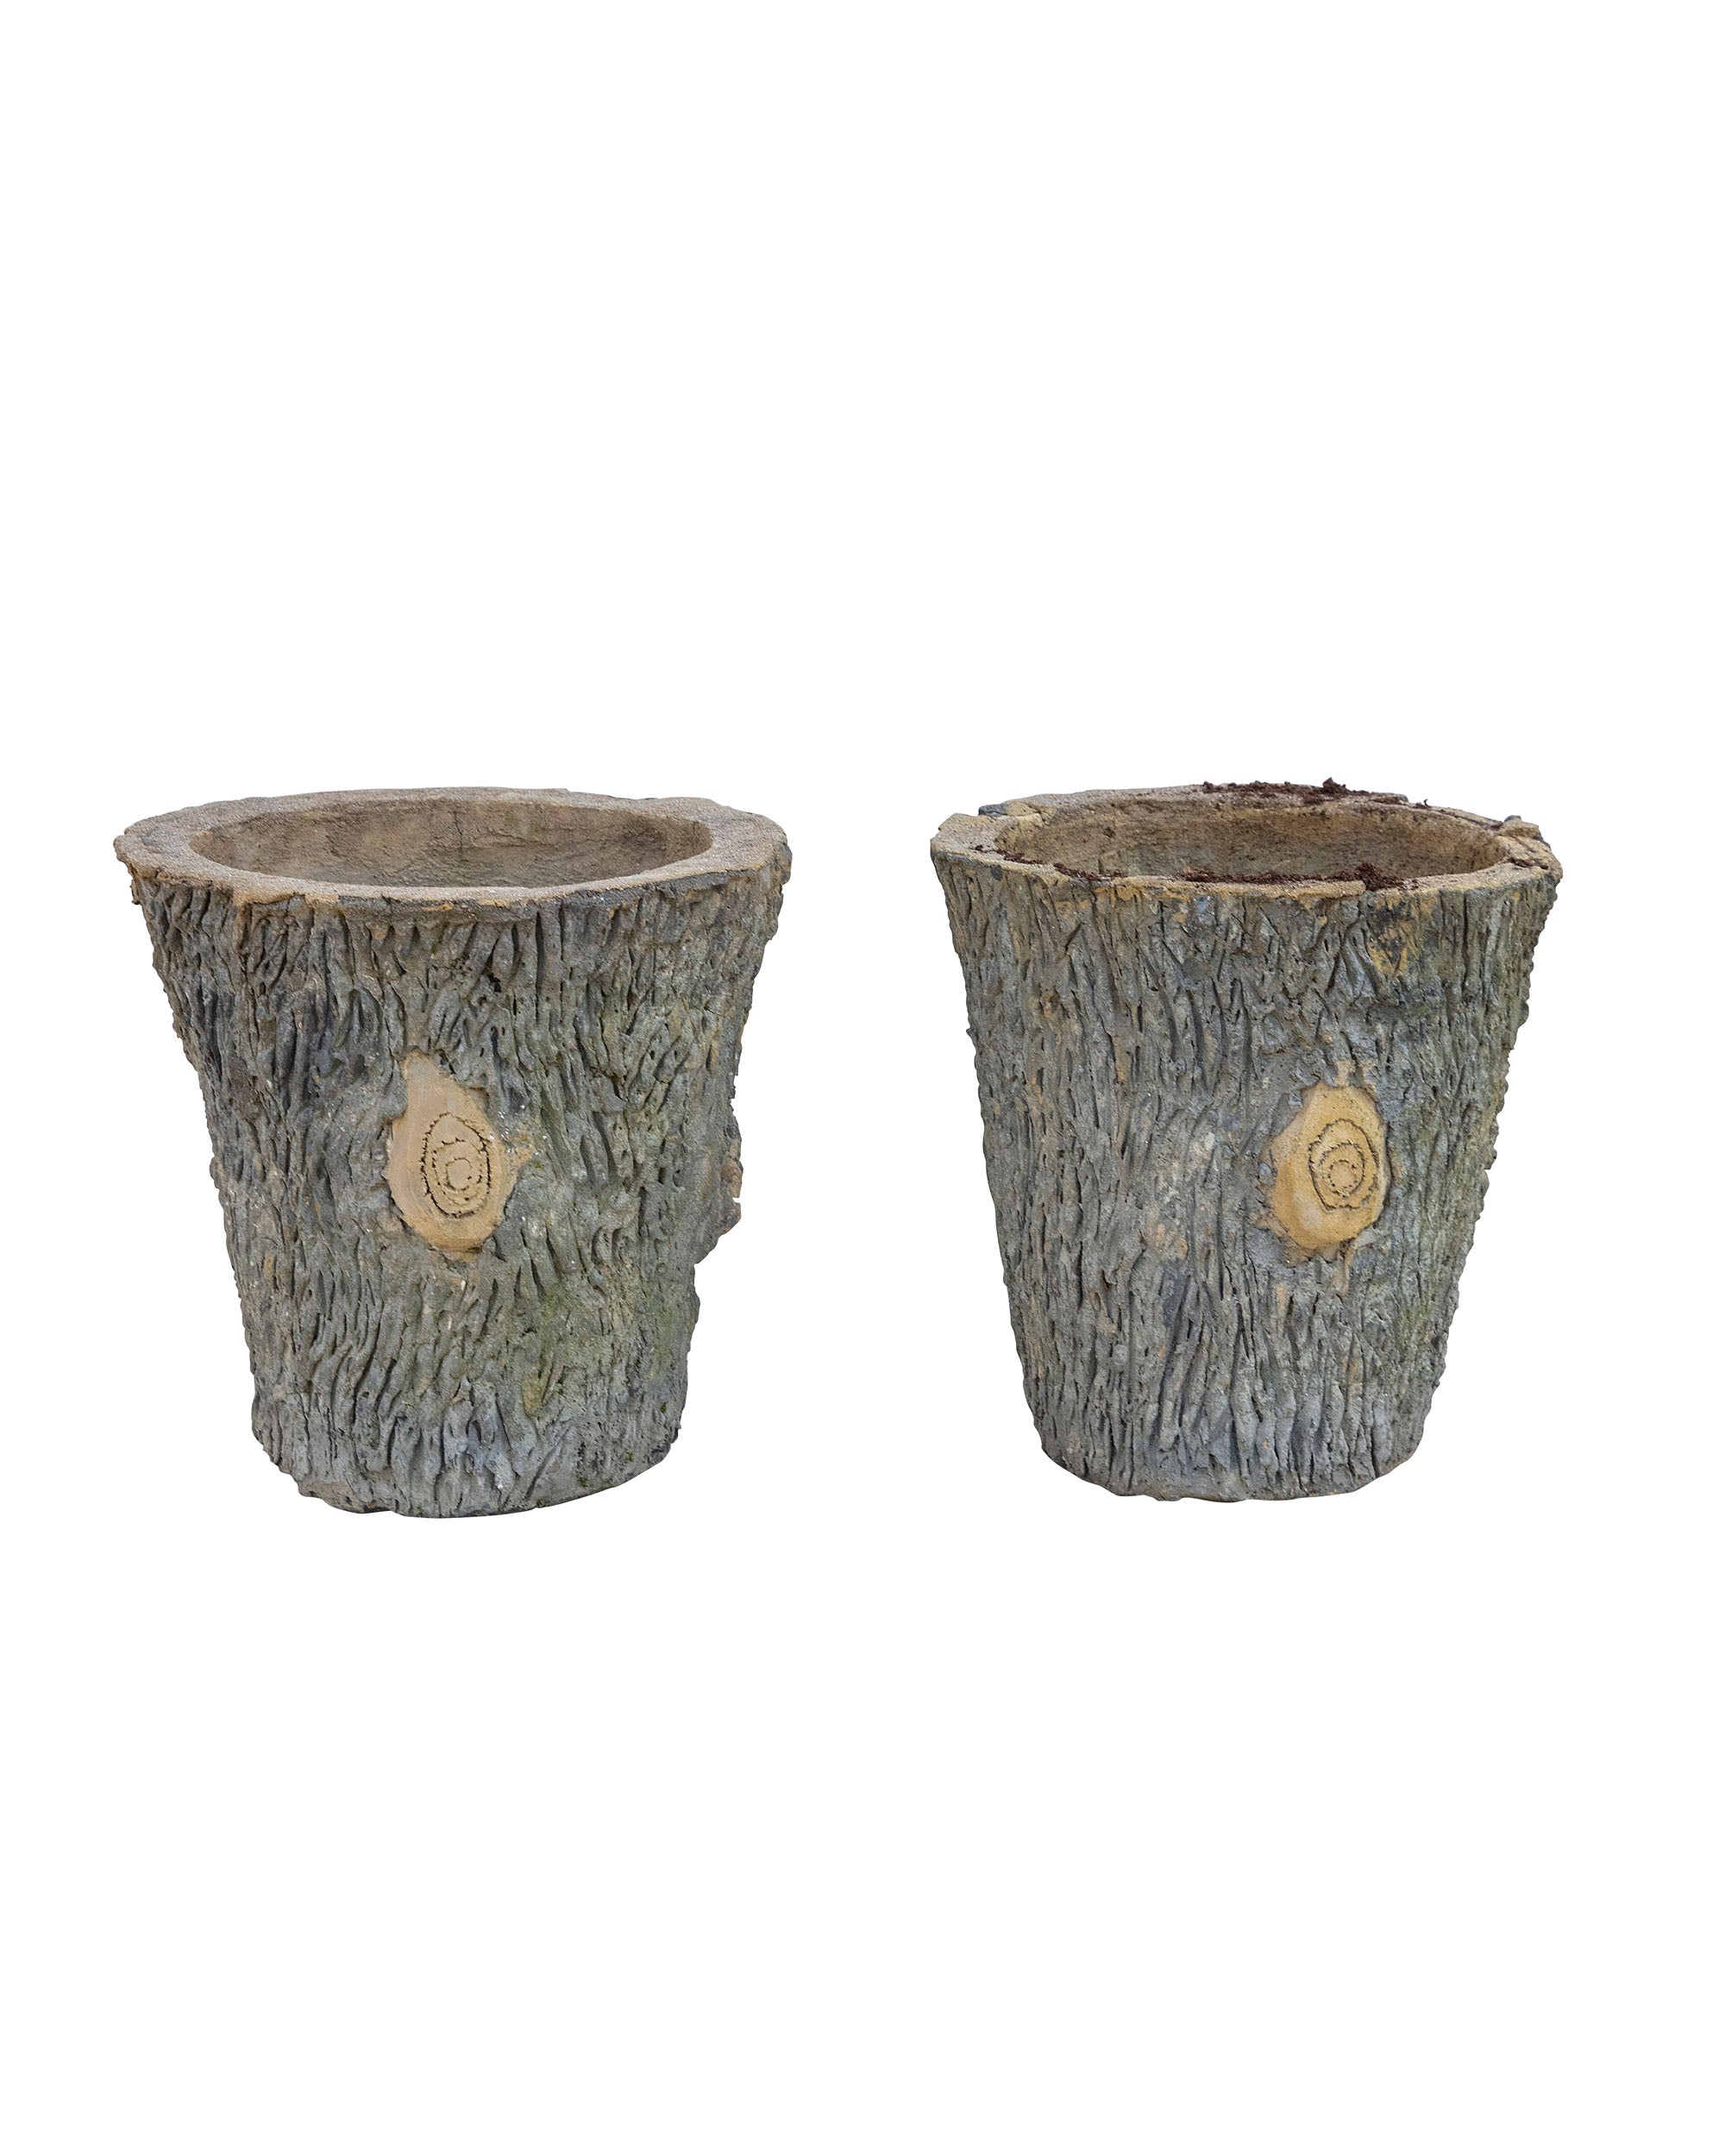 Pair of "Faux bois"(made of cement) planters 